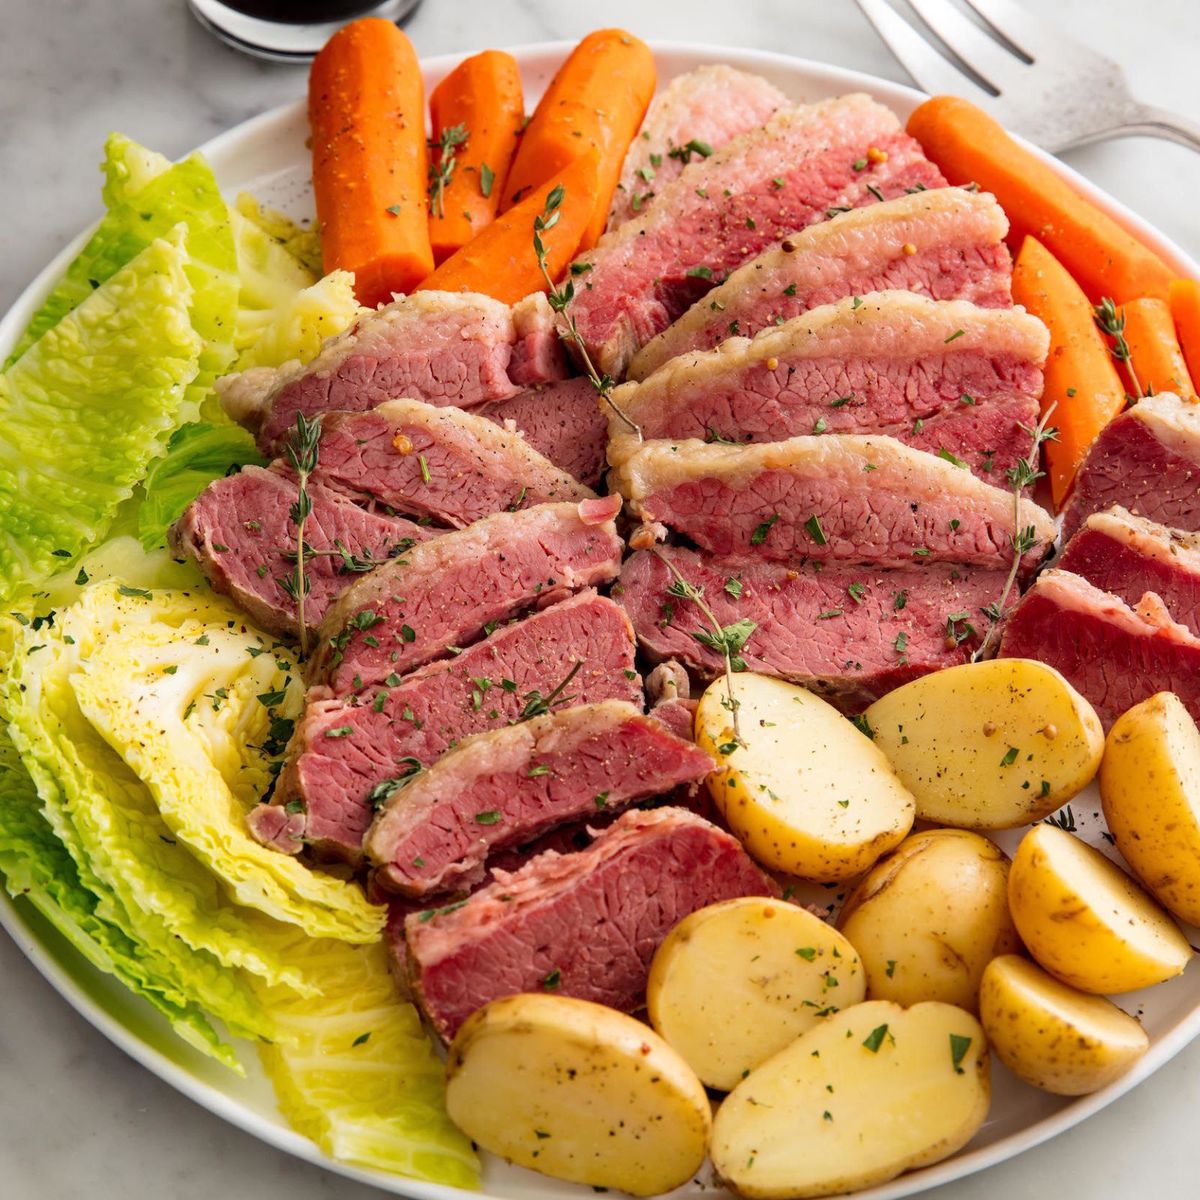 Best Corned Beef and Cabbage Recipe - How to Make Corned Beef and